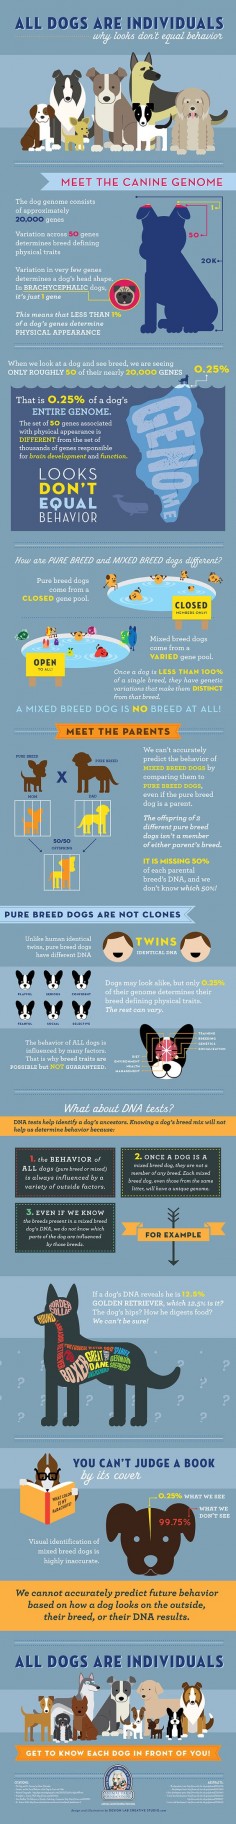 All Dogs Are Individuals - Pet Infographic #pet #infographic